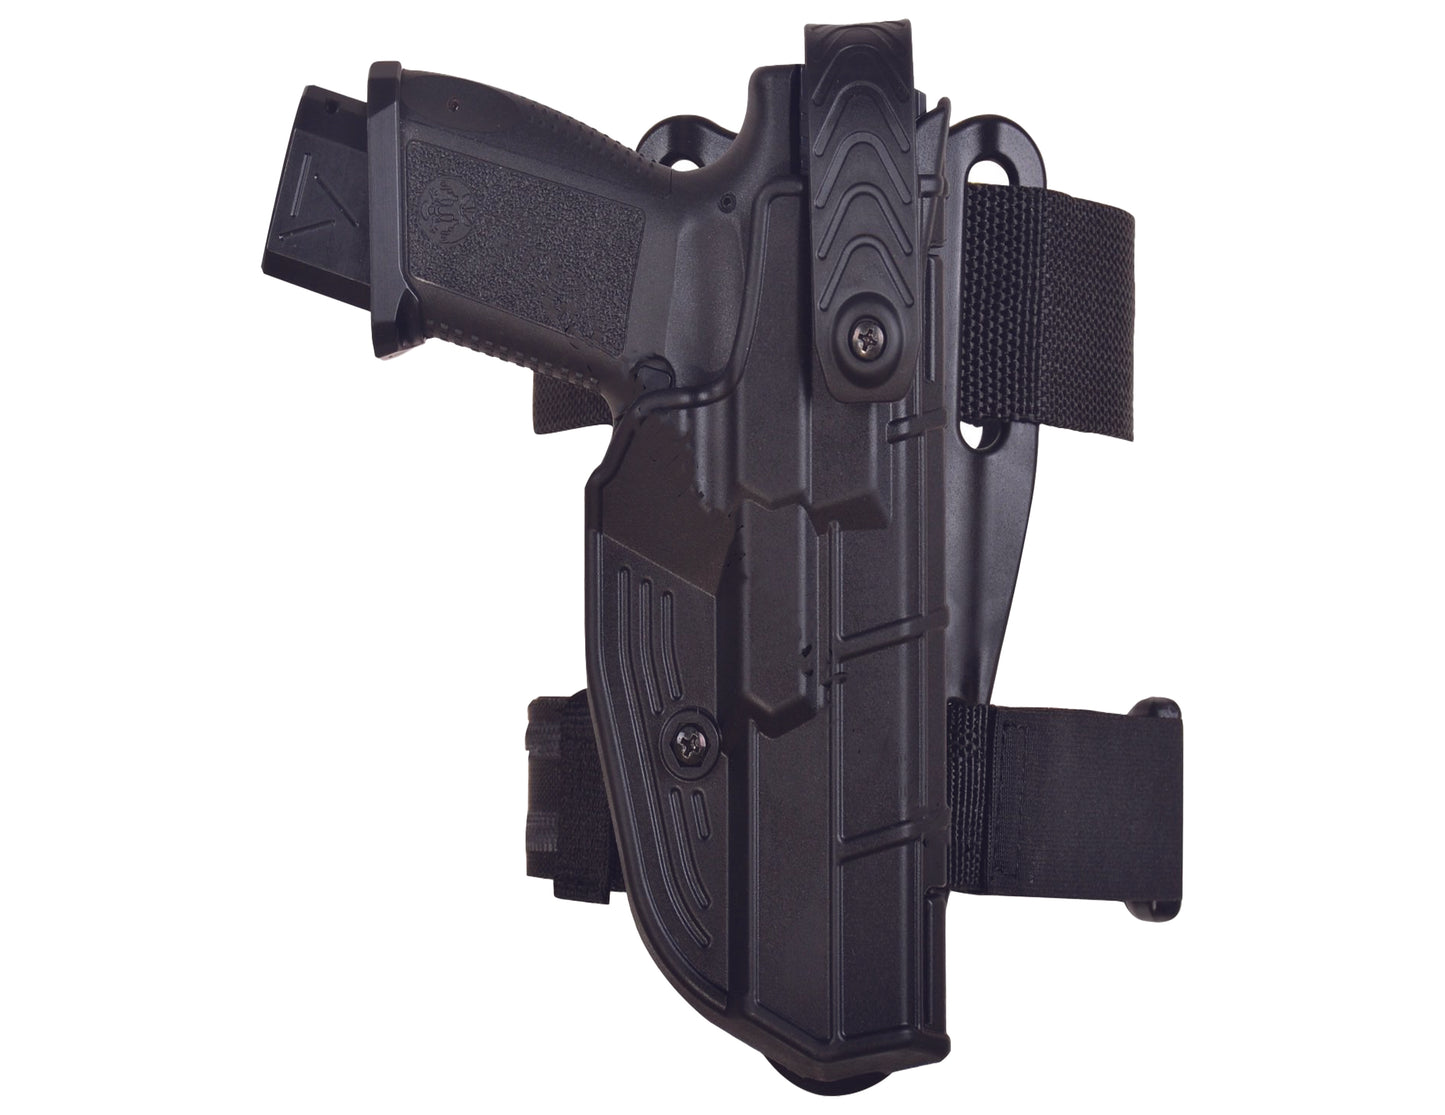 SAR 9 Level 2 Retention Duty Holster, Low Ride, RH or LH